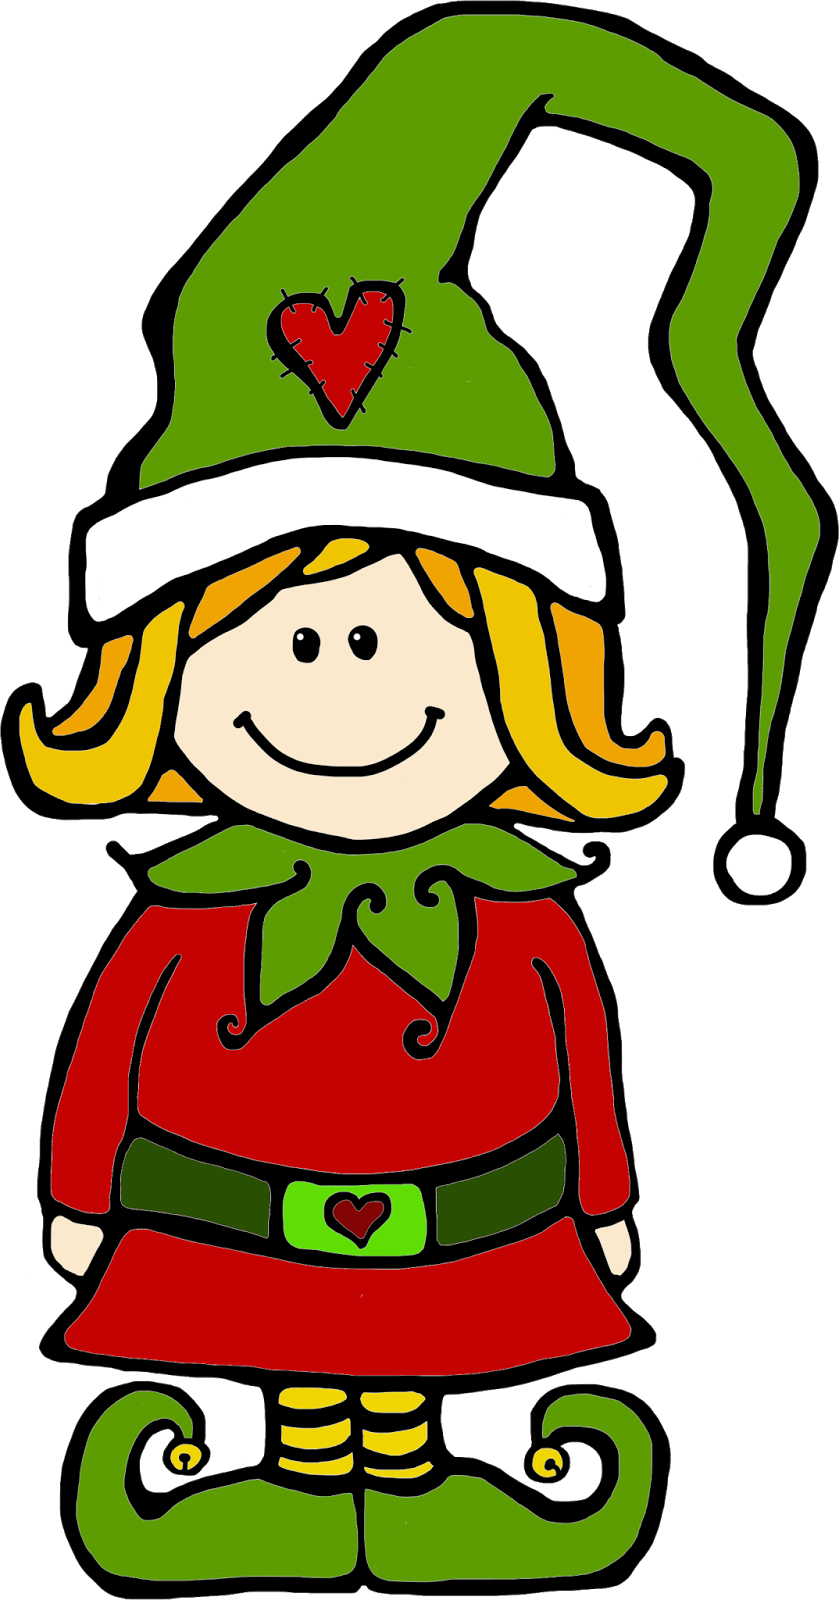 Image Result For Whimsy Workshop Teaching - Christmas Elf (839x1600)